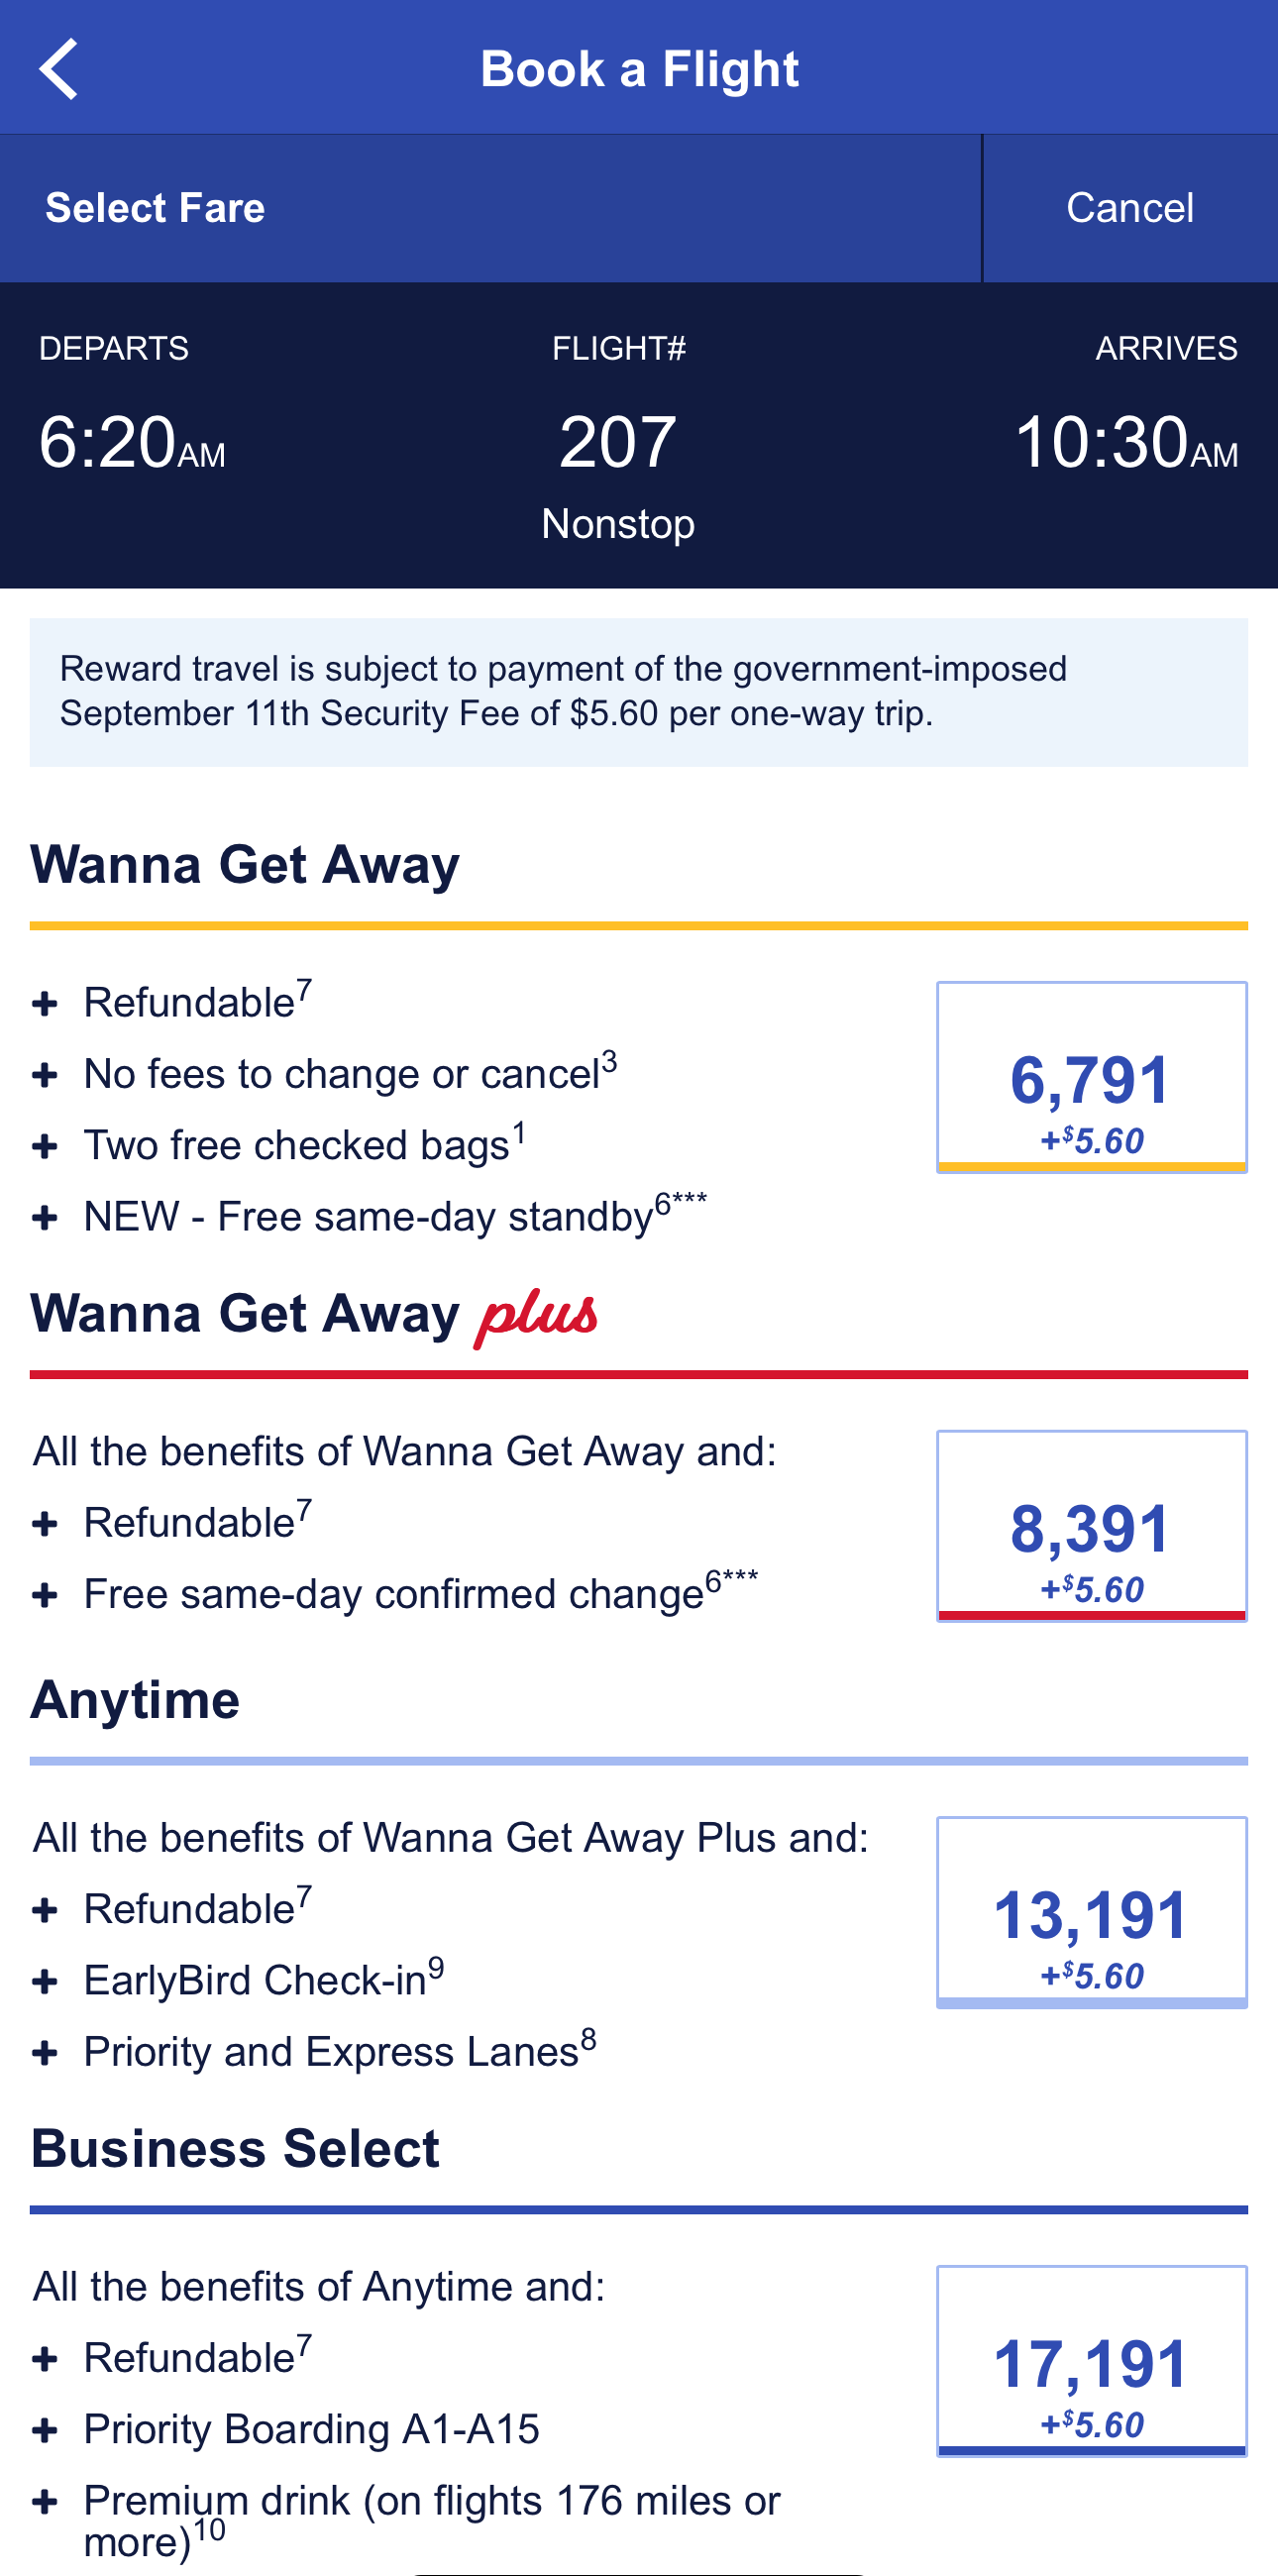 Redeem Southwest points for flights - Wanne Get Away, Anytime, Business Select